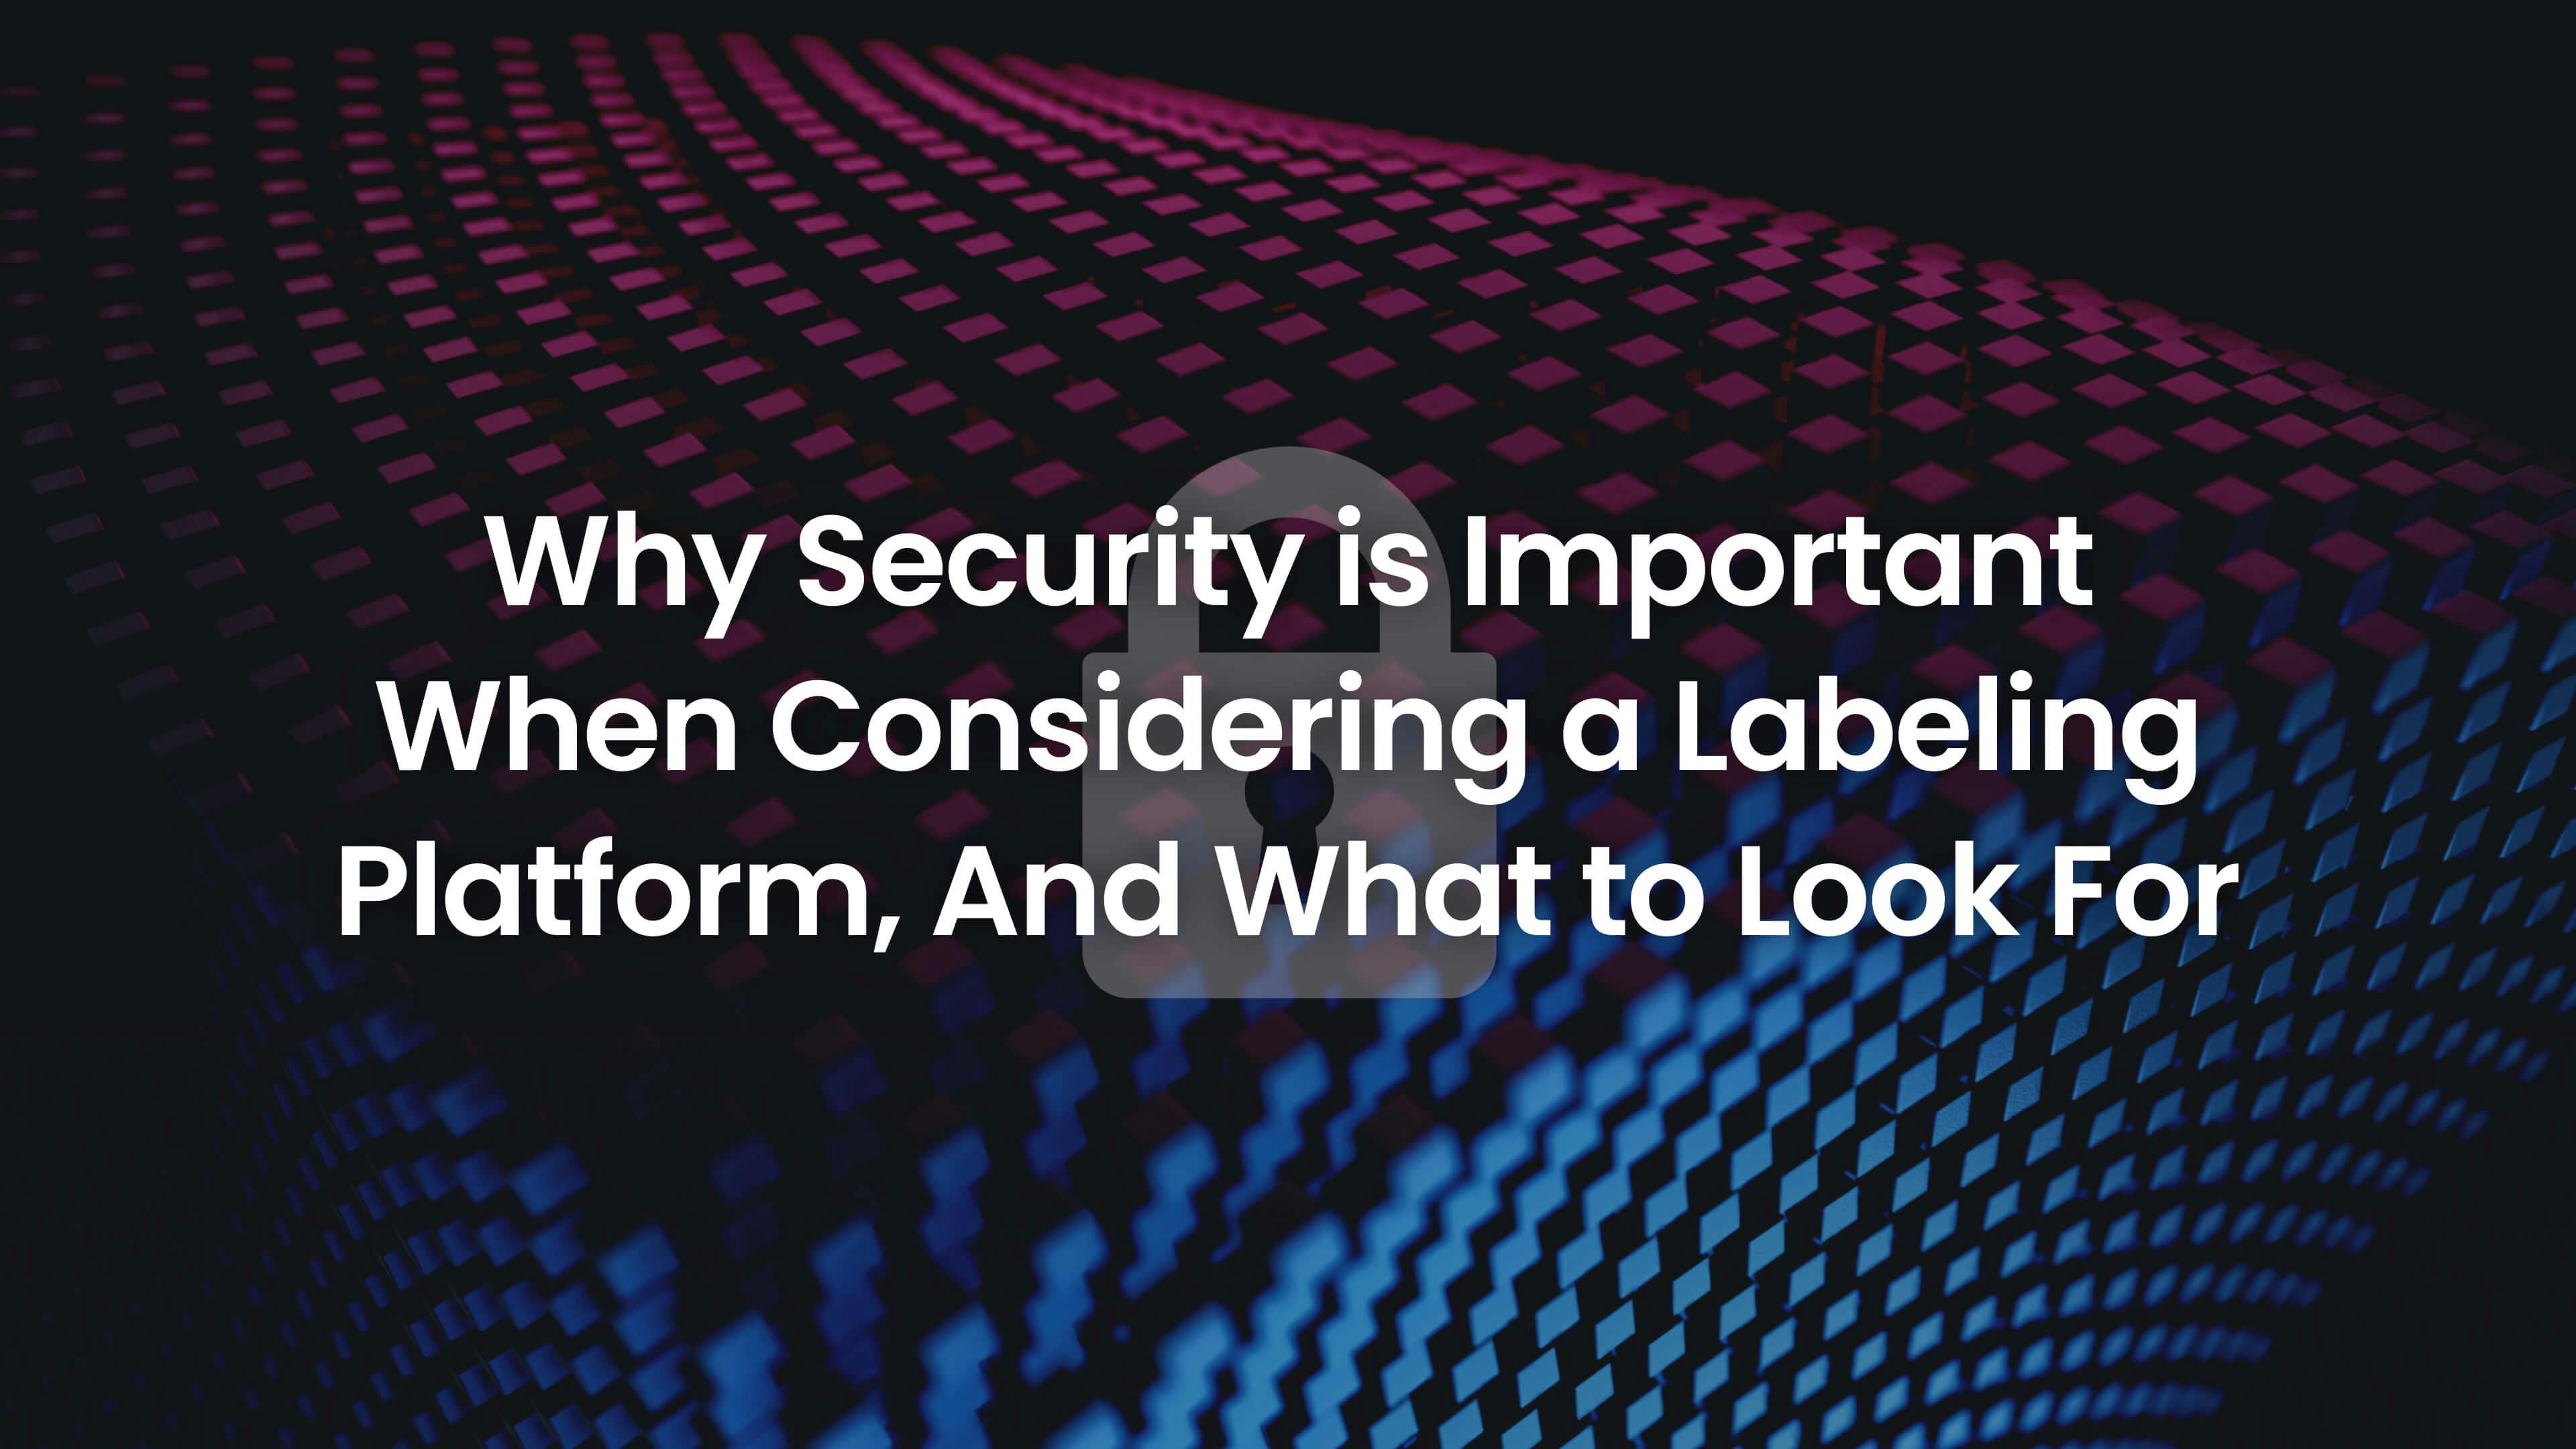 Security considerations for computer vision labeling platform.